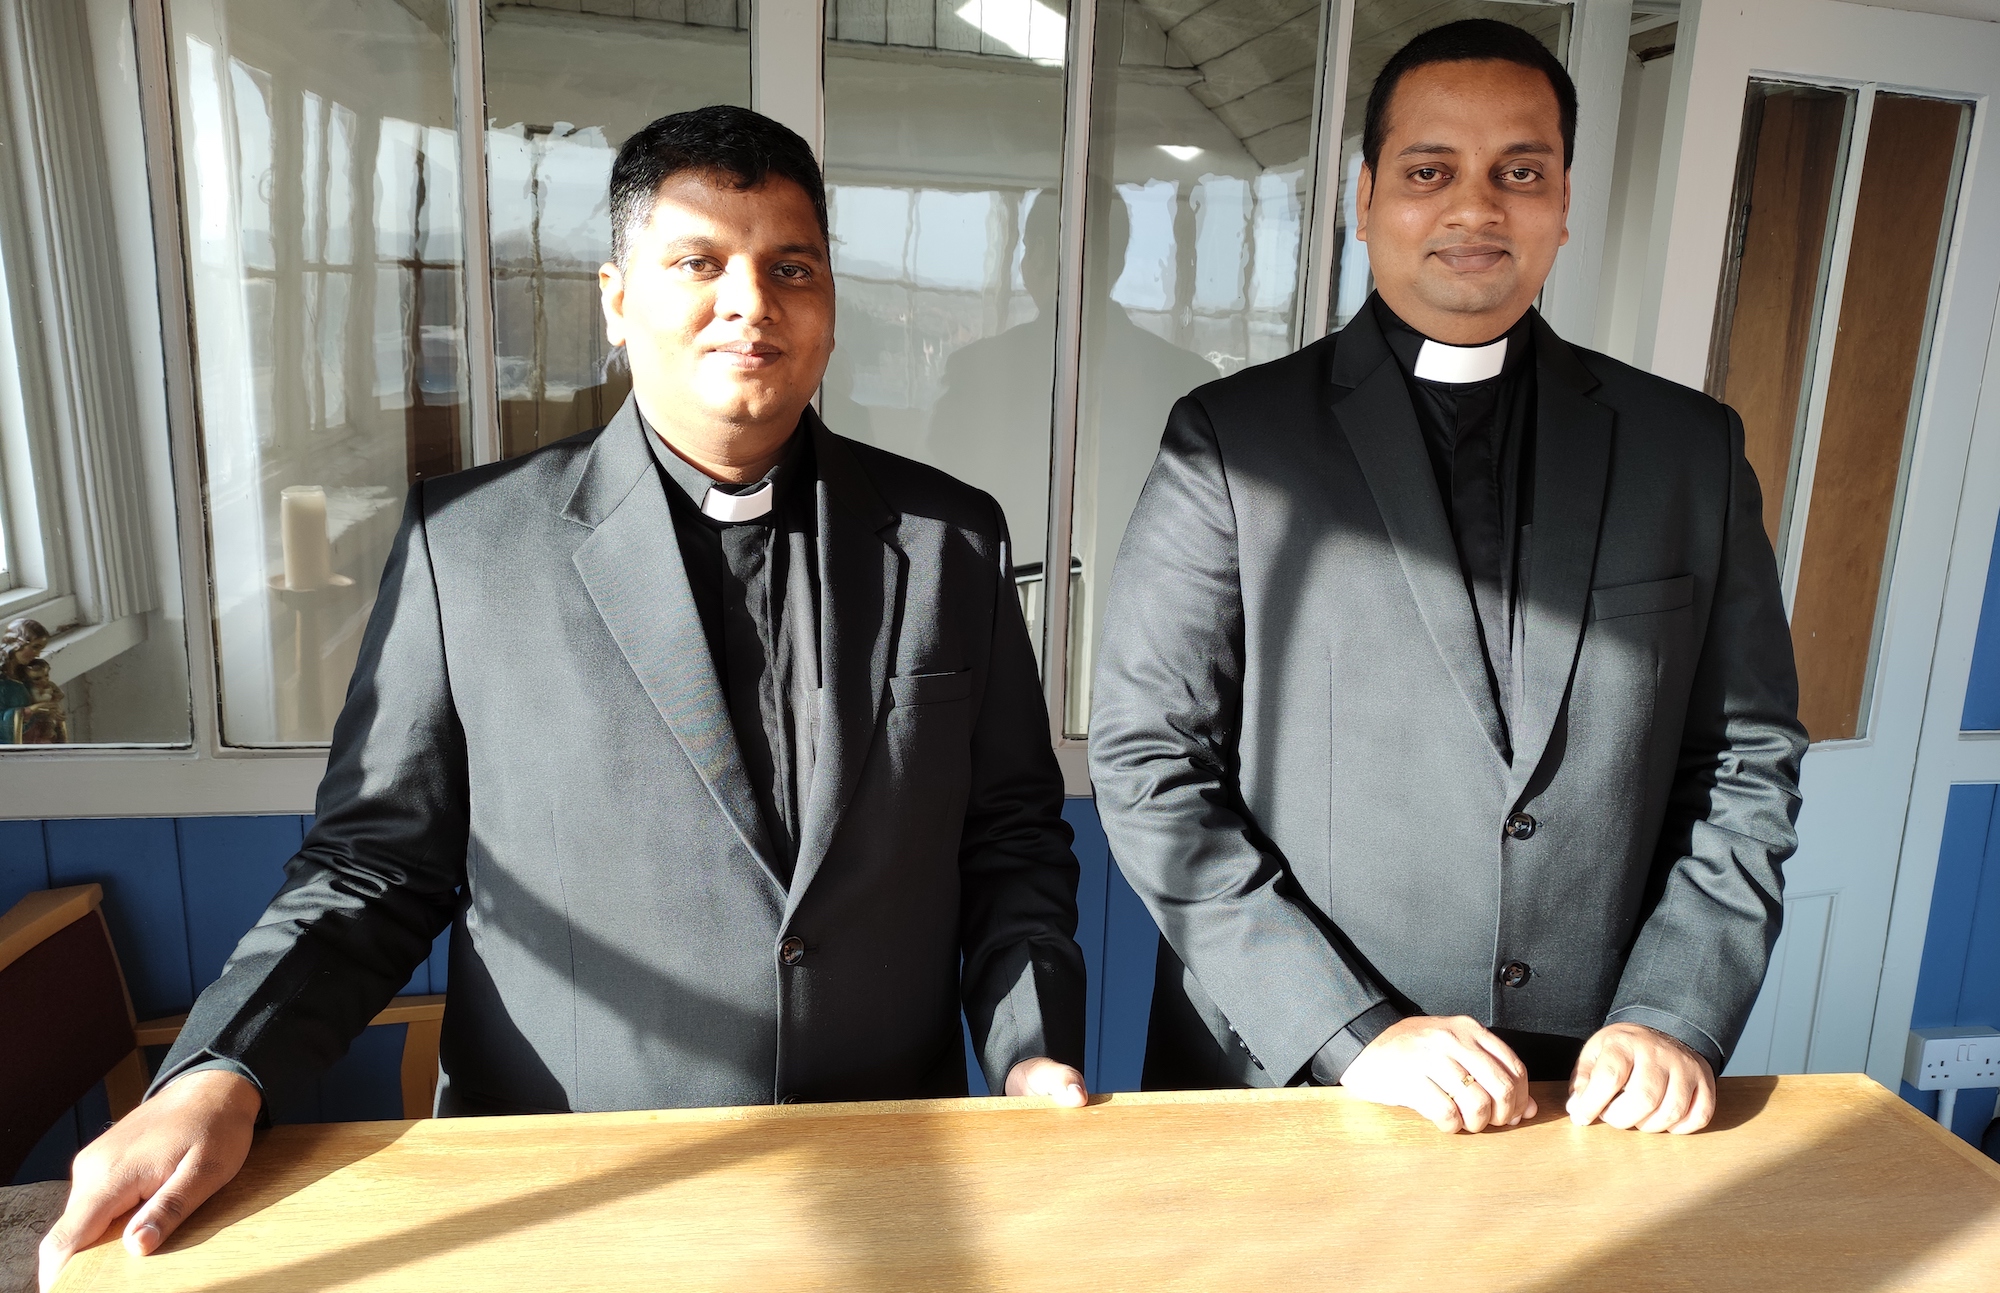 Father Xavier Santhiyagu and Father Anil Kumar Narisetti, who will live at St Francis in Acklam, Middlesbrough, while working throughout the cathedral parish